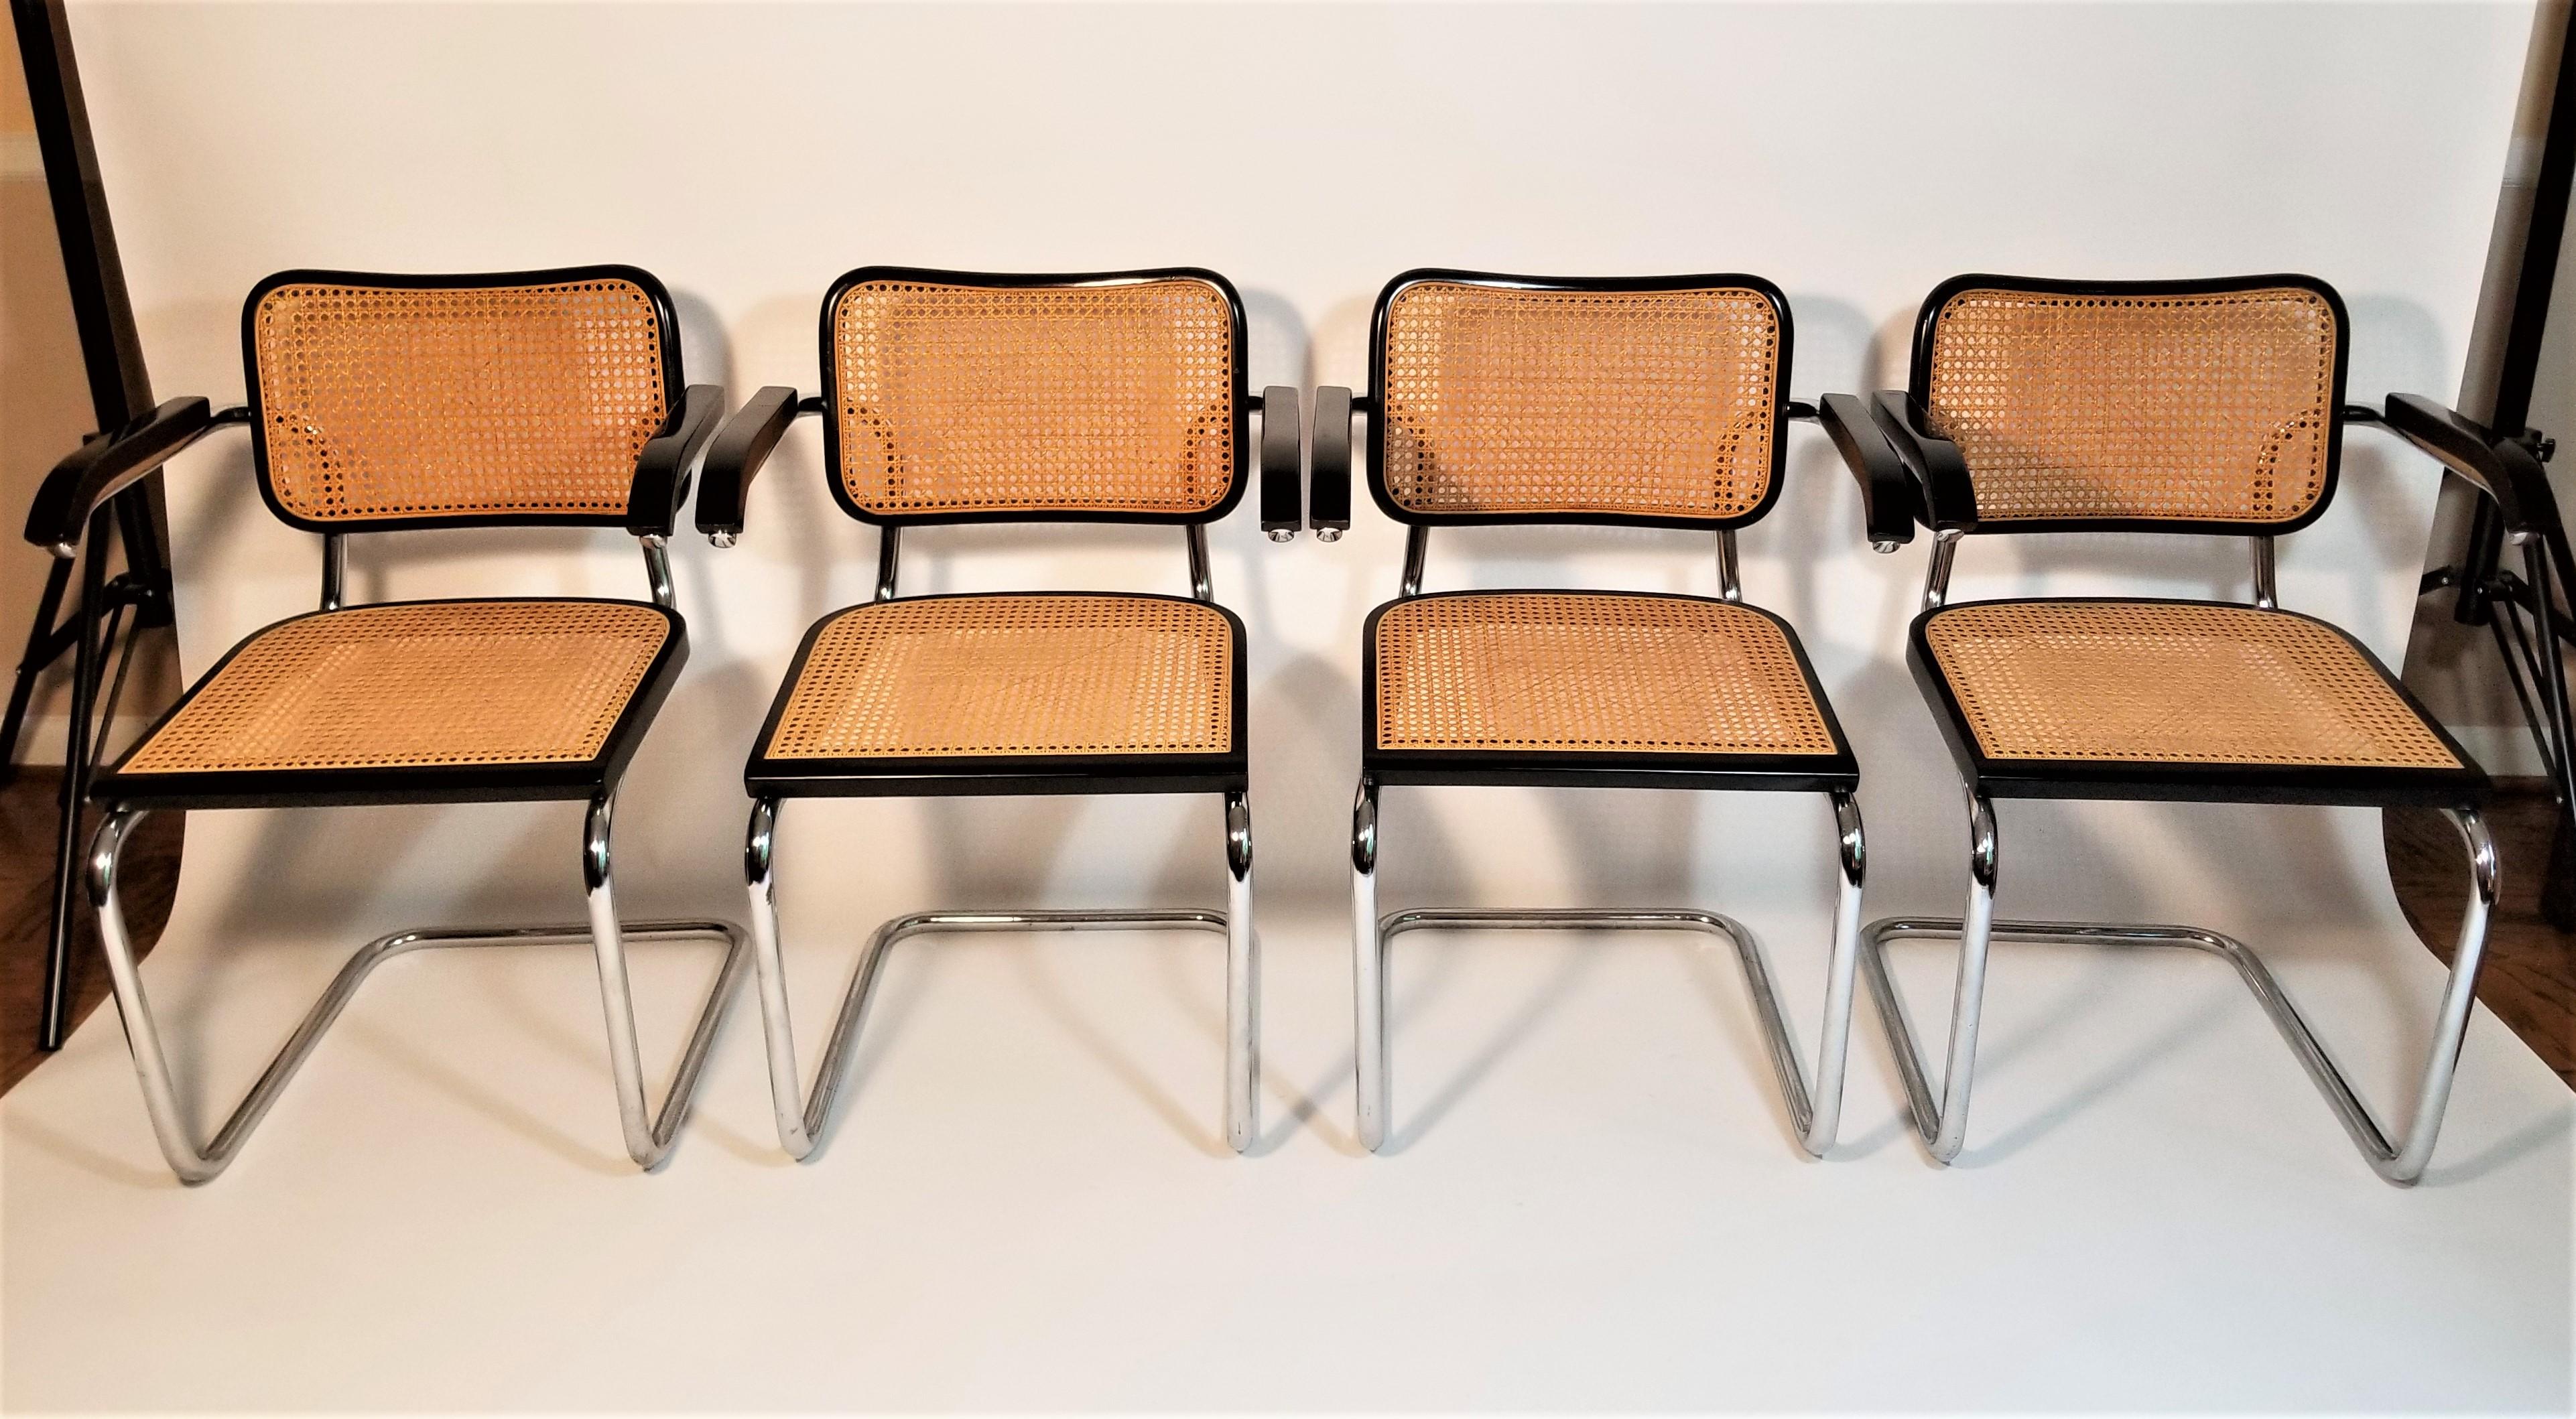 Set of 4 midcentury 1980s Marcel Breuer Cesca Black armchairs. Acquired from the estate of owner who purchased the entire set in the 1980s. Black finish. Cane seats and backs. Classic chrome tubular cantilever frames. We polish all chrome.